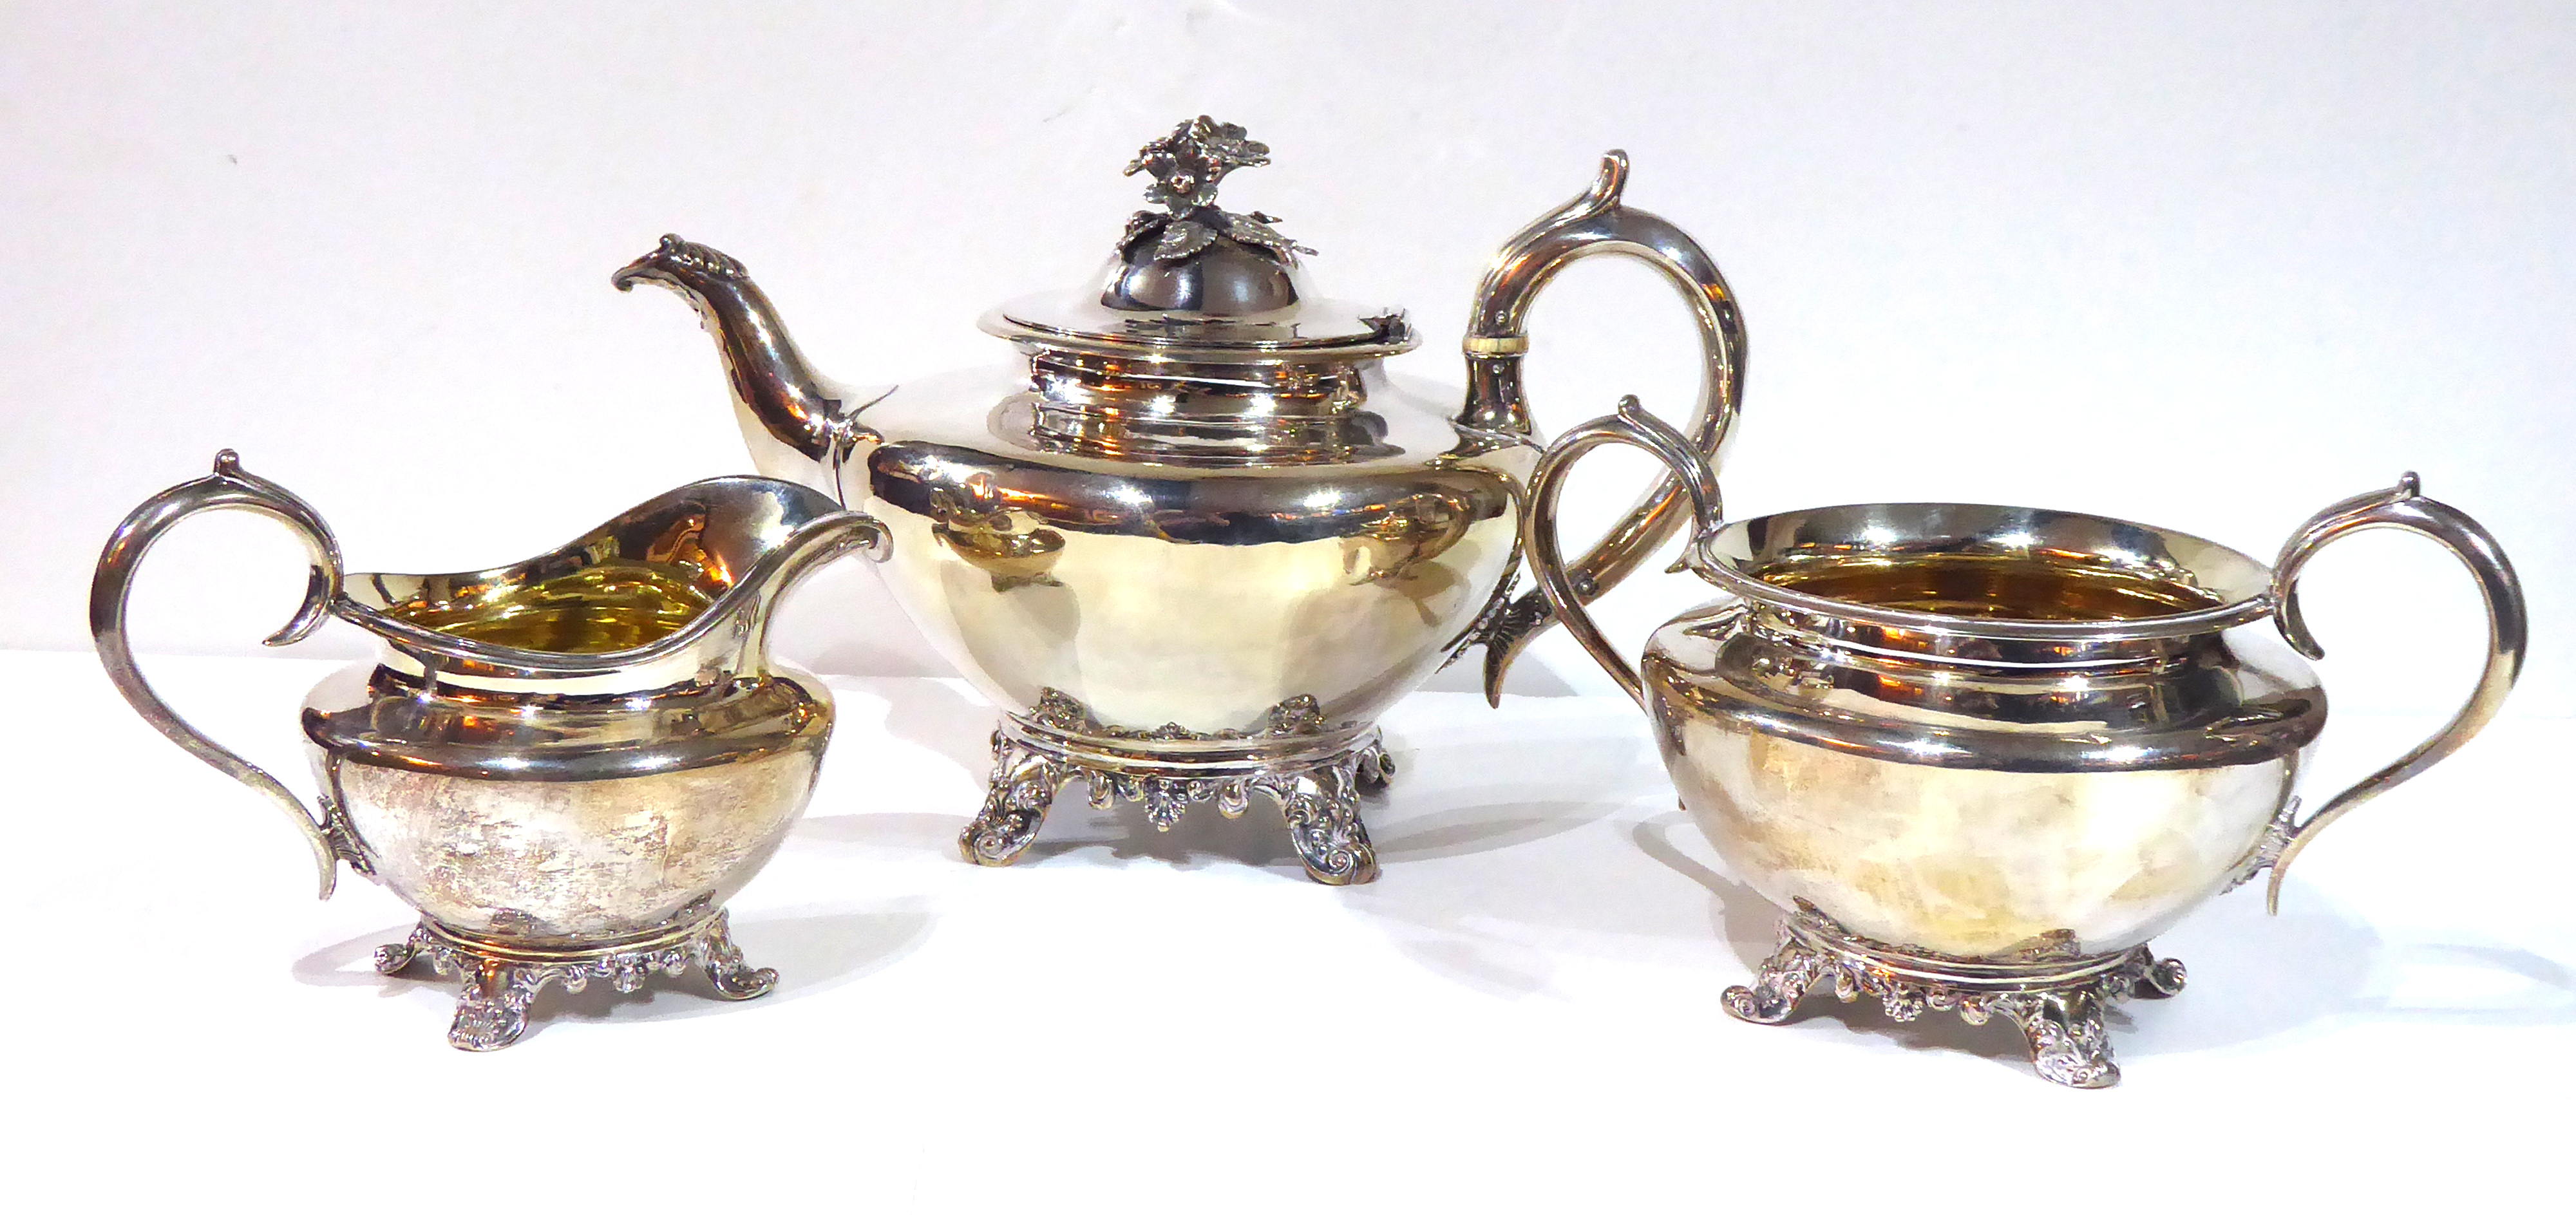 A VICTORIAN SILVER THREE PIECE TEA SERVICE Comprising a large teapot with floral finial, sugar basin